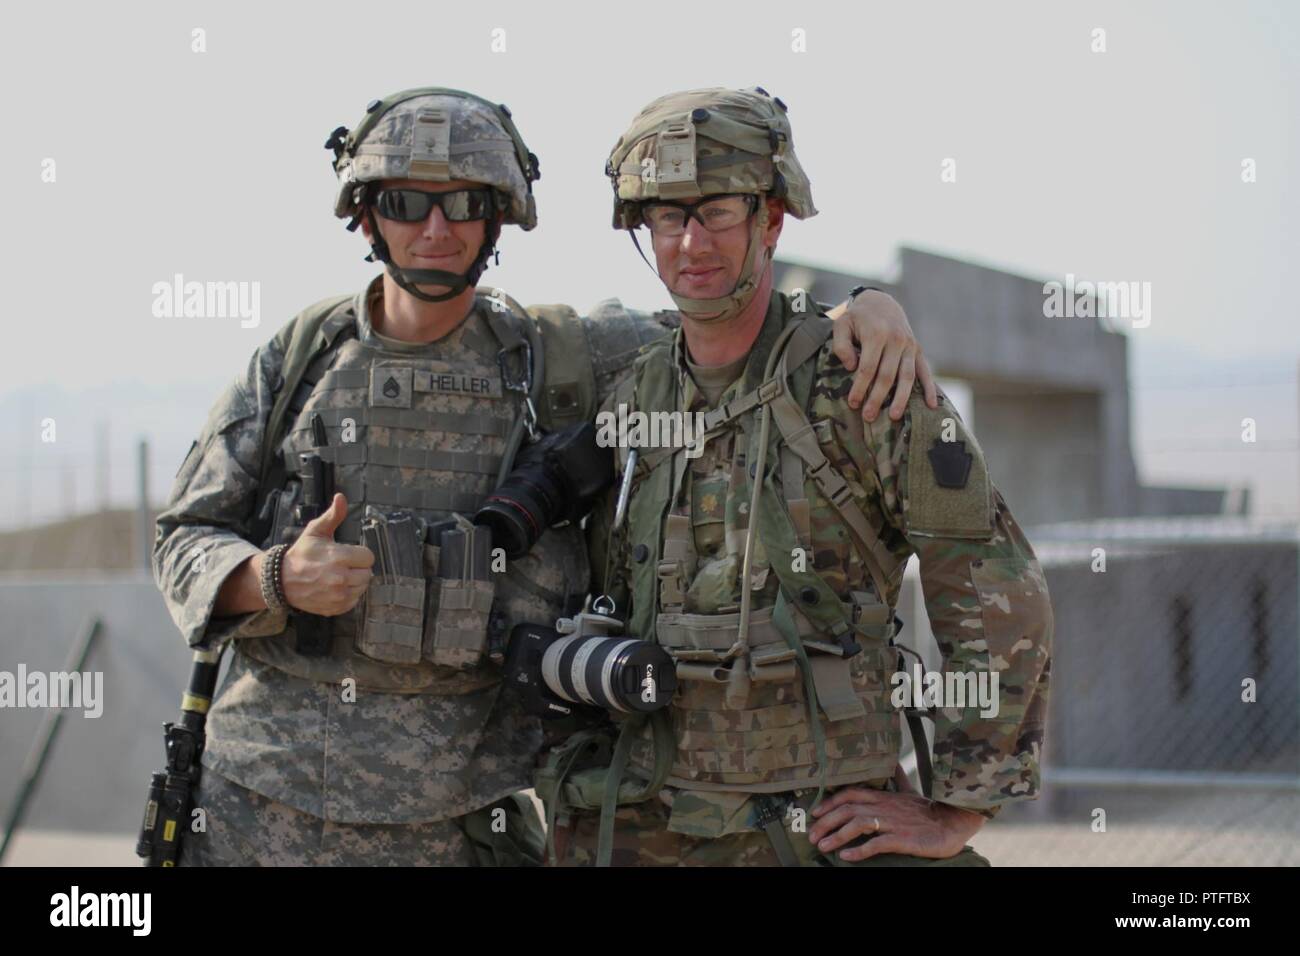 Staff Sgt. Coltin Heller (left), a public affairs specialist, and Maj. Greg McElwain (right), the brigade public affairs officer with the 56th Stryker Brigade Combat Team, 28th Infantry Division, Pennsylvania Army National Guard, pose for a picture before a simulated press conference Aug. 10 at the National Training Center, Fort Irwin, Calif. Stock Photo